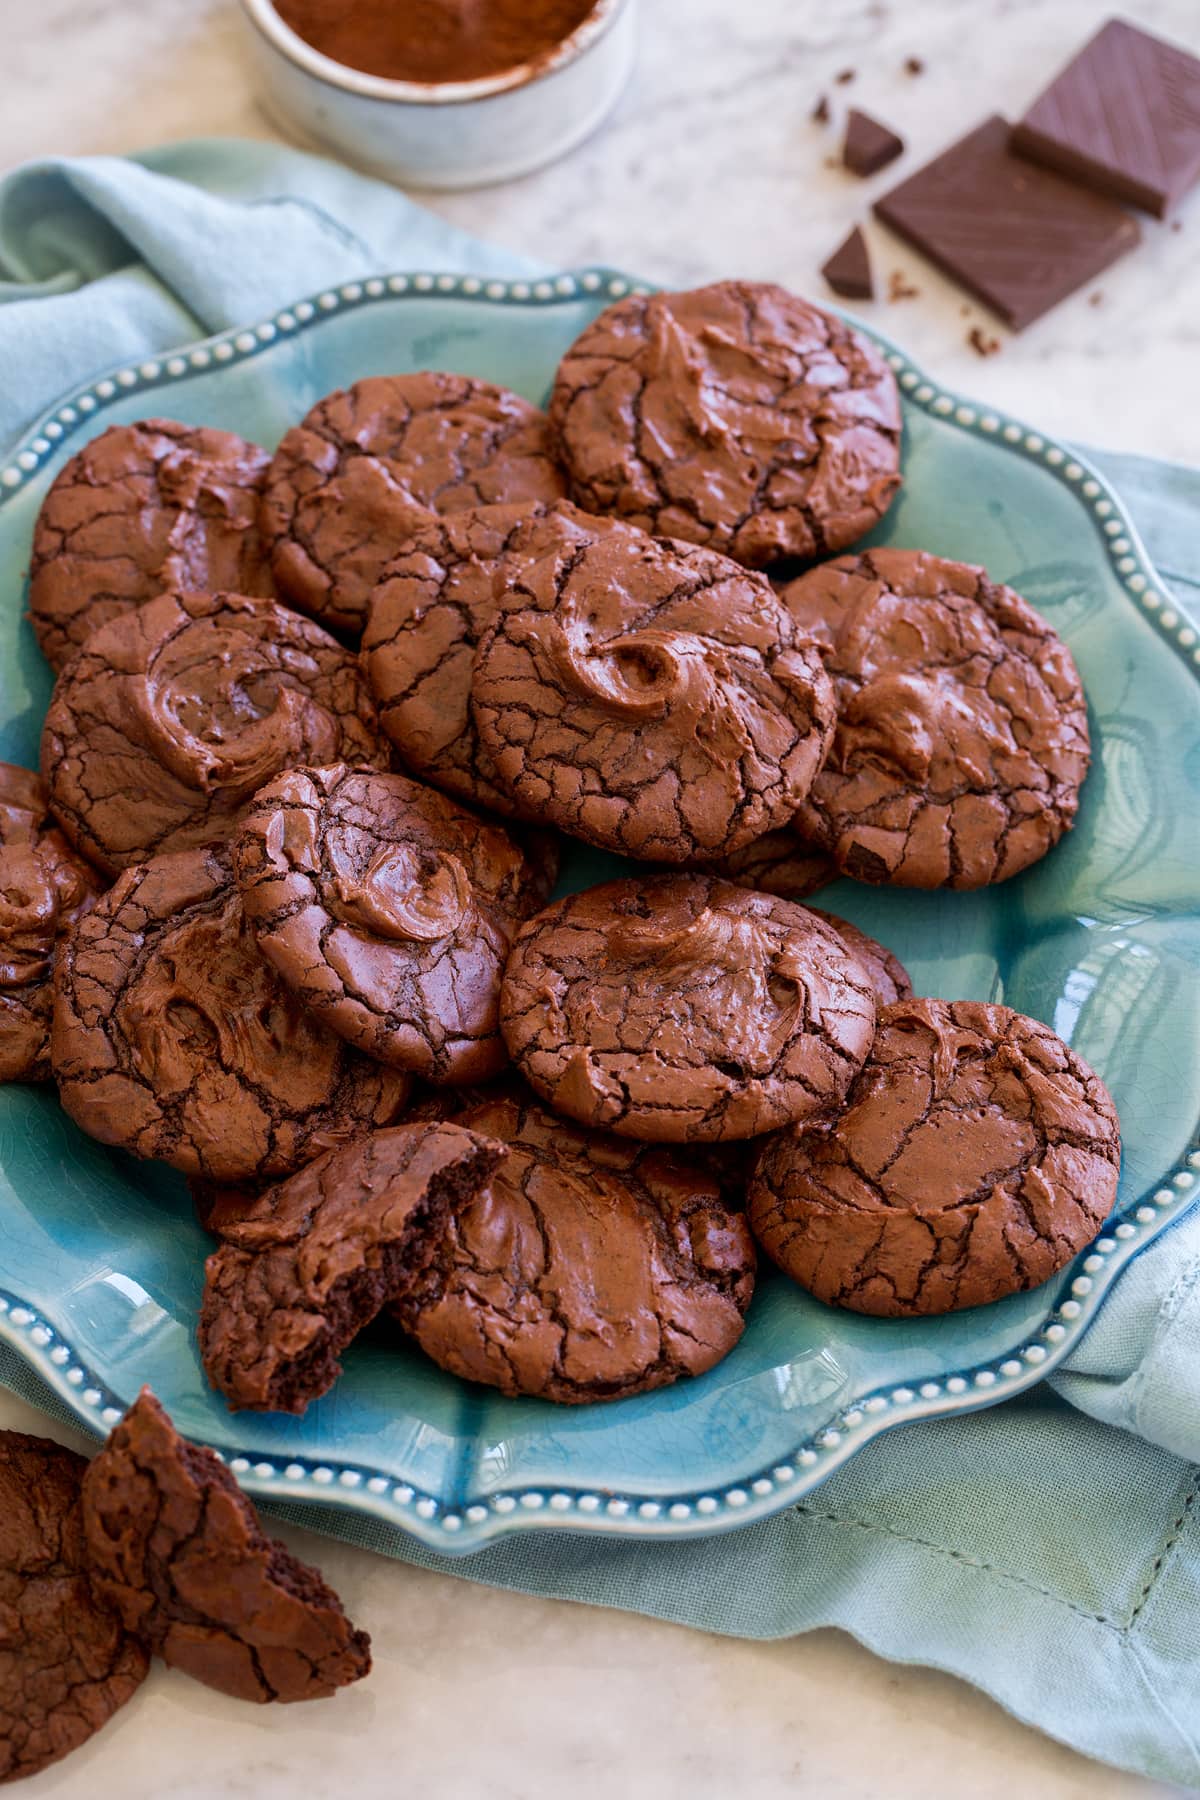 Brownie Cookies shown piled together on a turquoise serving plate.